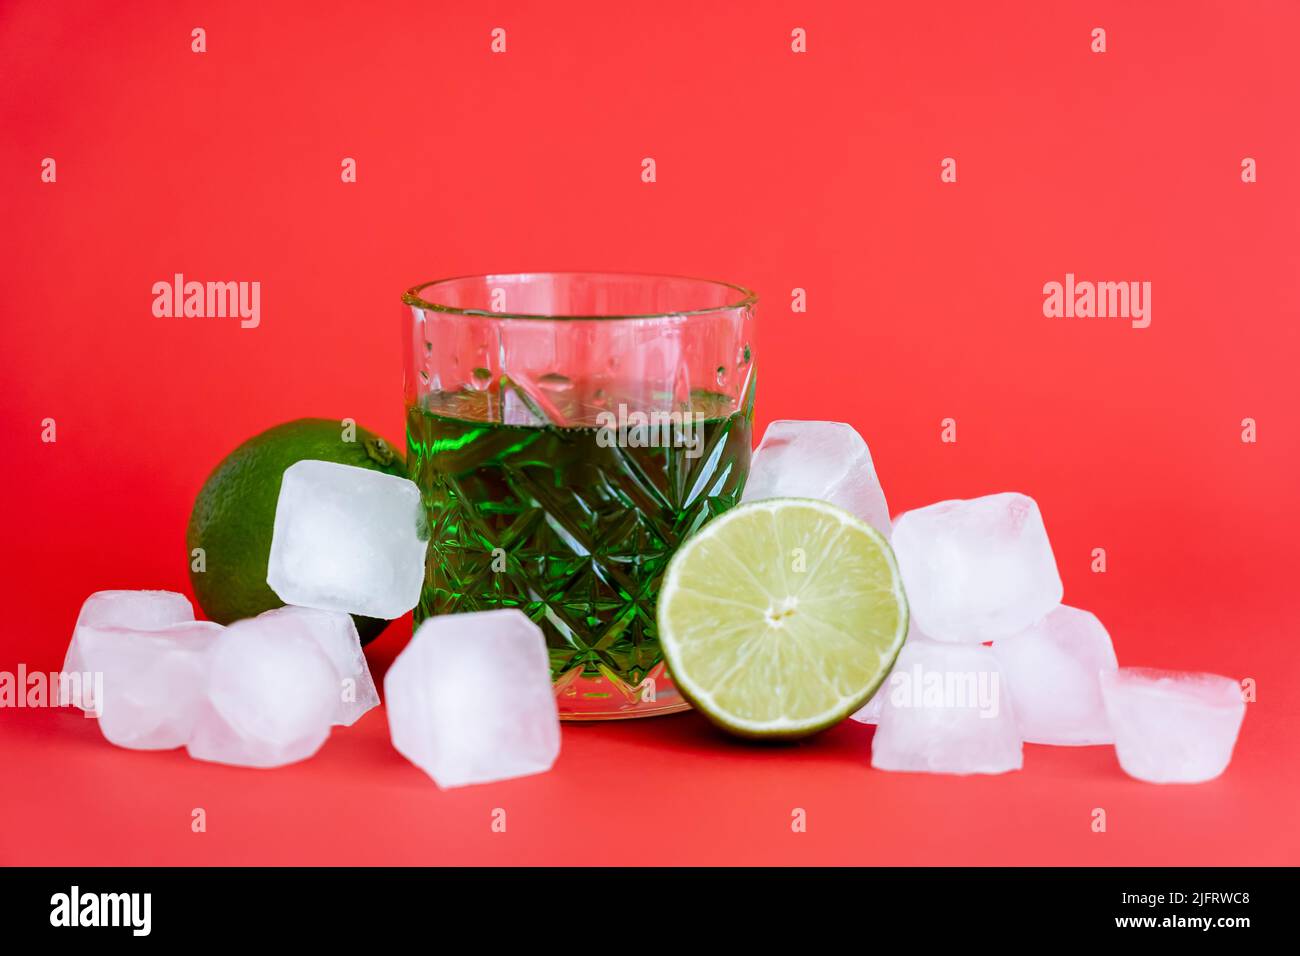 frozen ice cubes near glass with alcohol green drink and limes on red Stock Photo